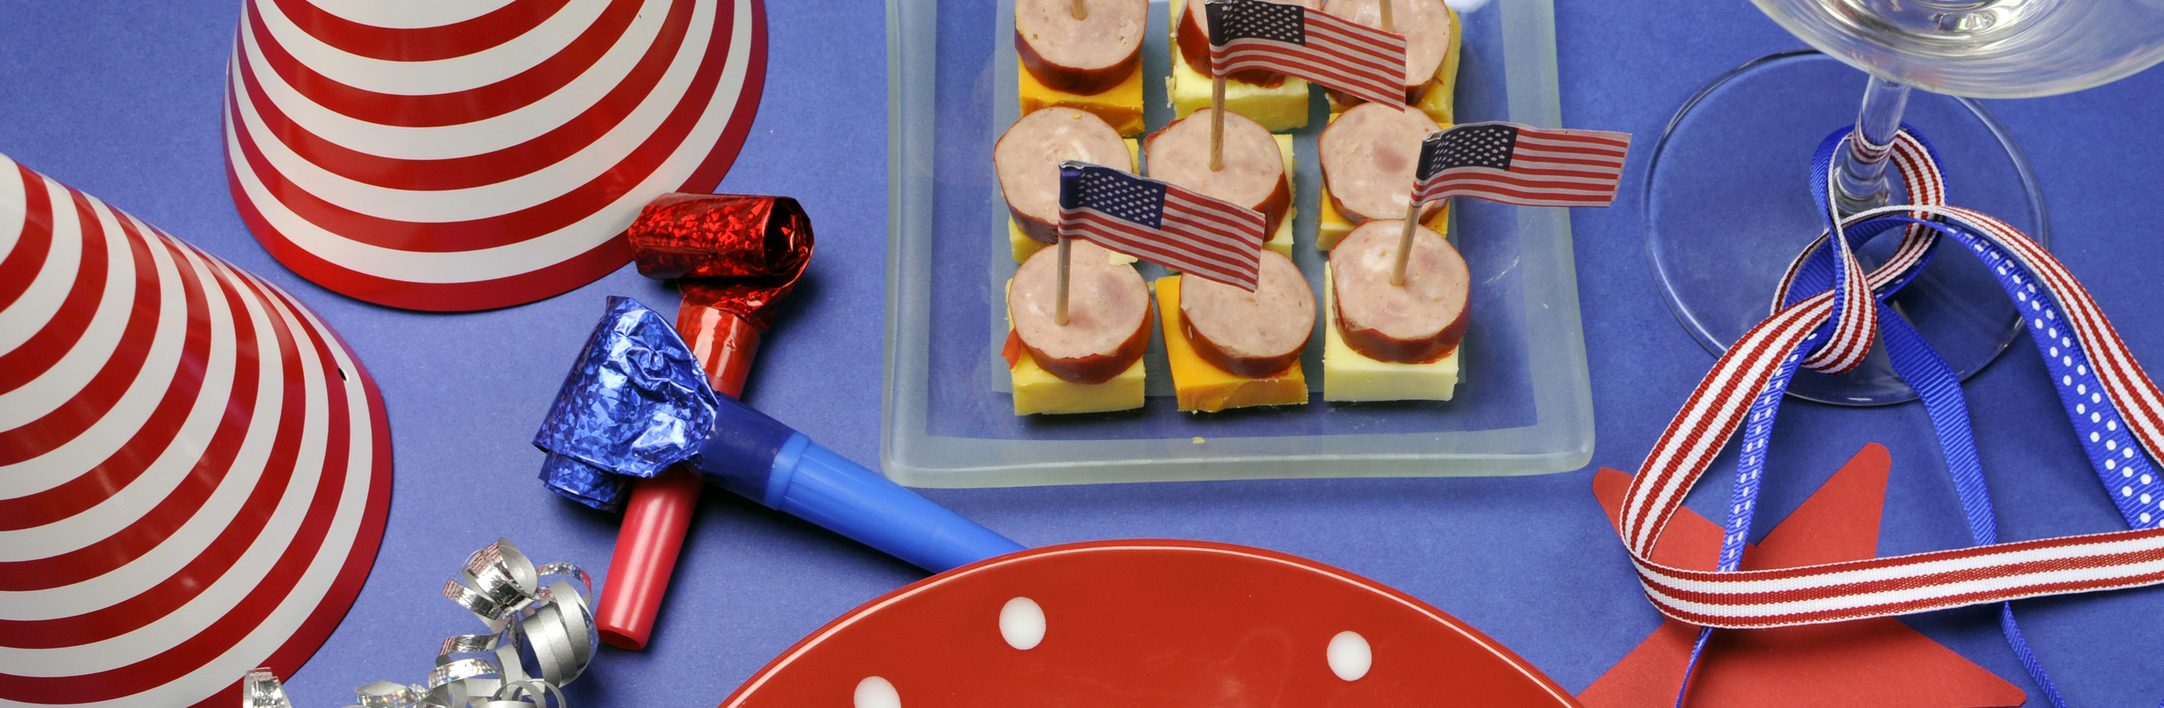 How to throw a killer 4th of July cookout on a budget